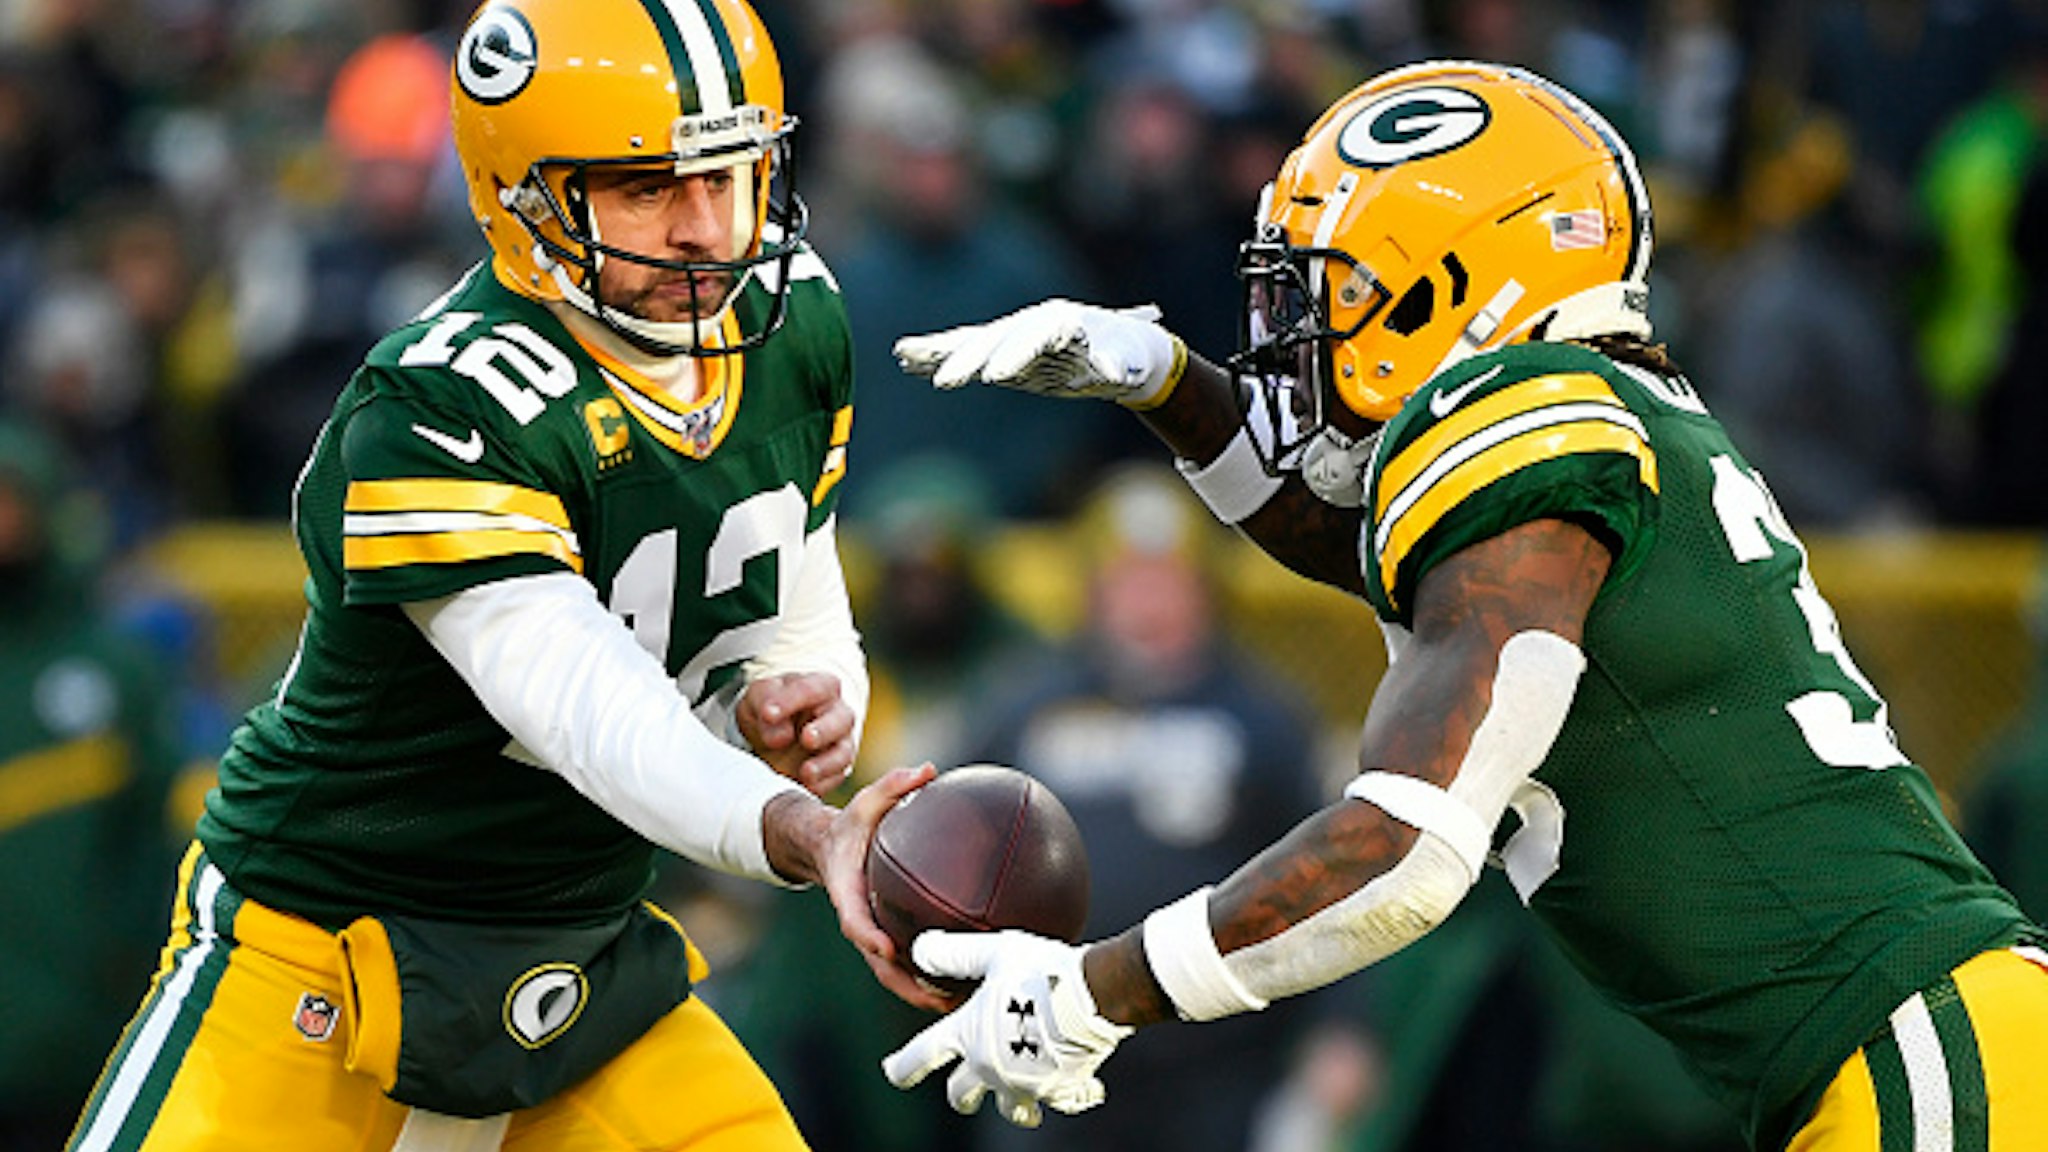 GREEN BAY, WISCONSIN - DECEMBER 15: Aaron Rodgers #12 of the Green Bay Packers hands the football off during the game against the Chicago Bears at Lambeau Field on December 15, 2019 in Green Bay, Wisconsin.